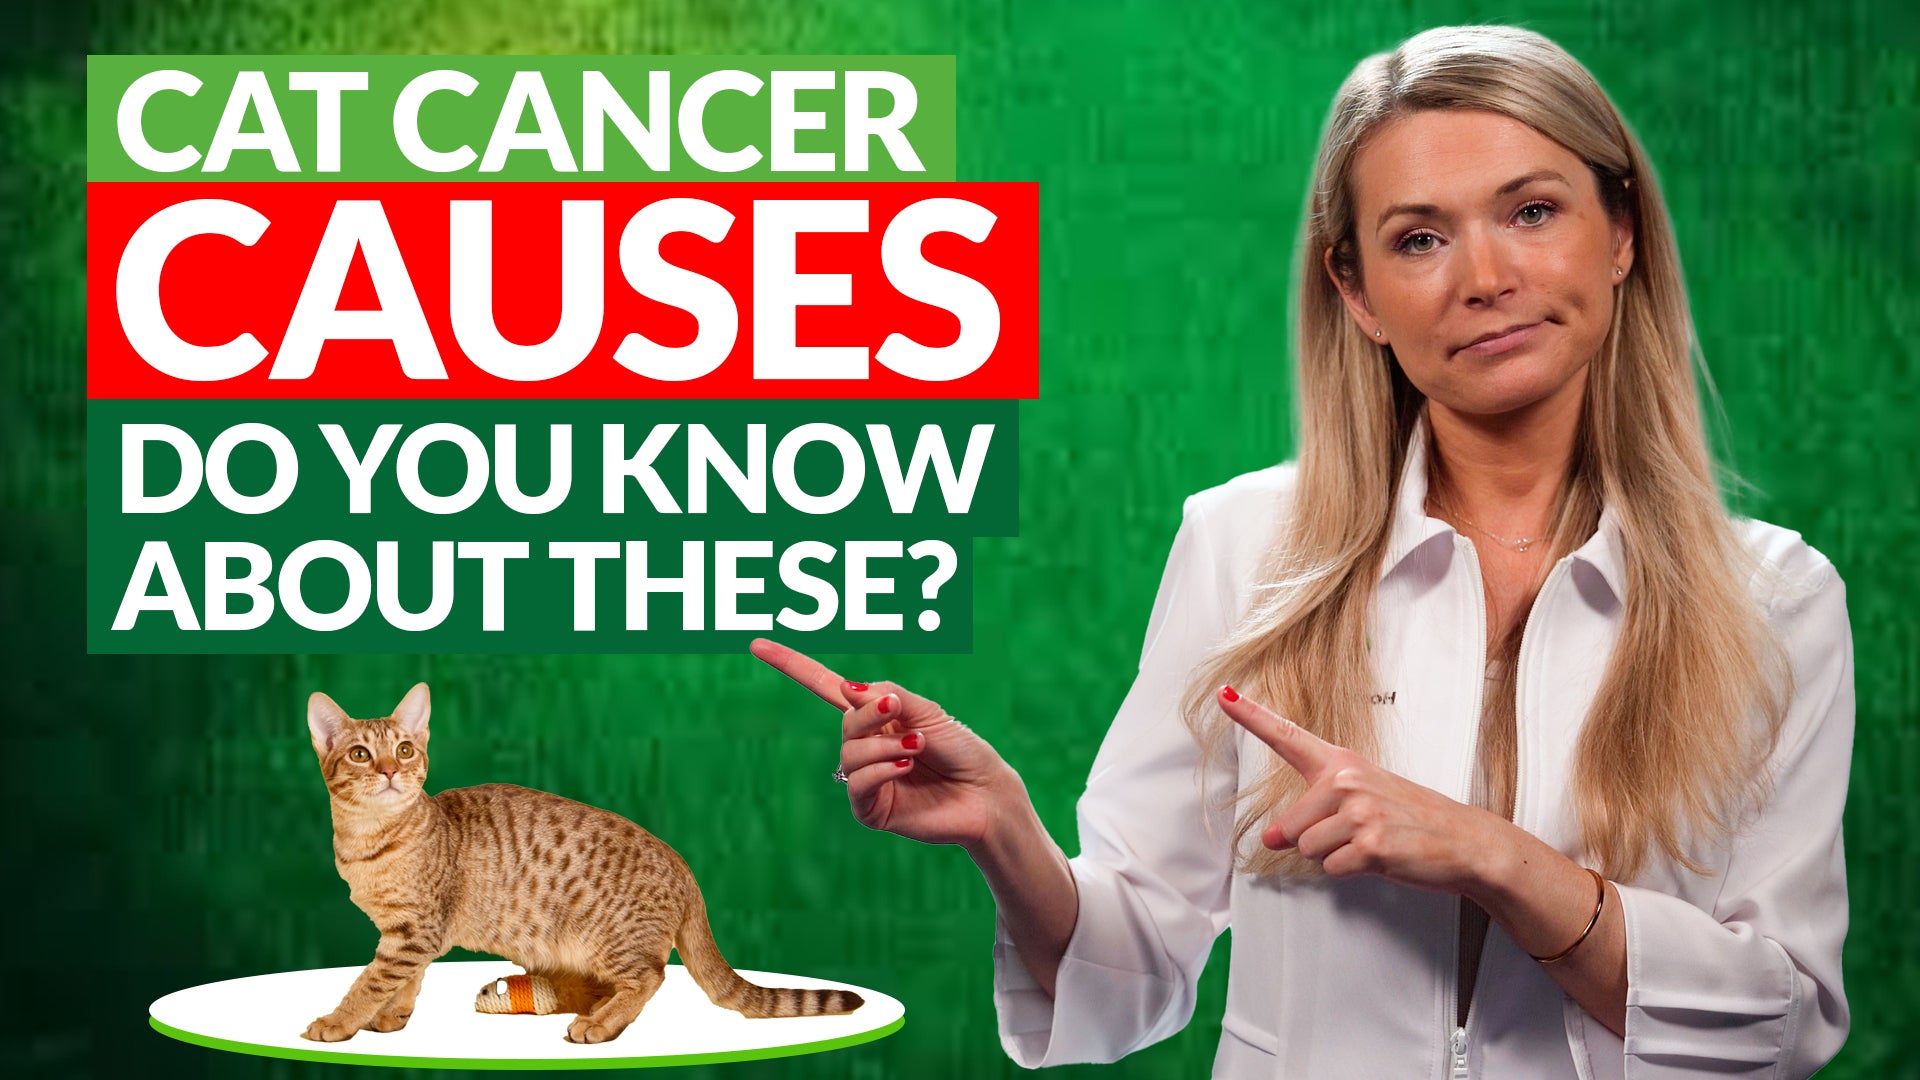 4 Cat Cancer Causes Most People Seem to Ignore